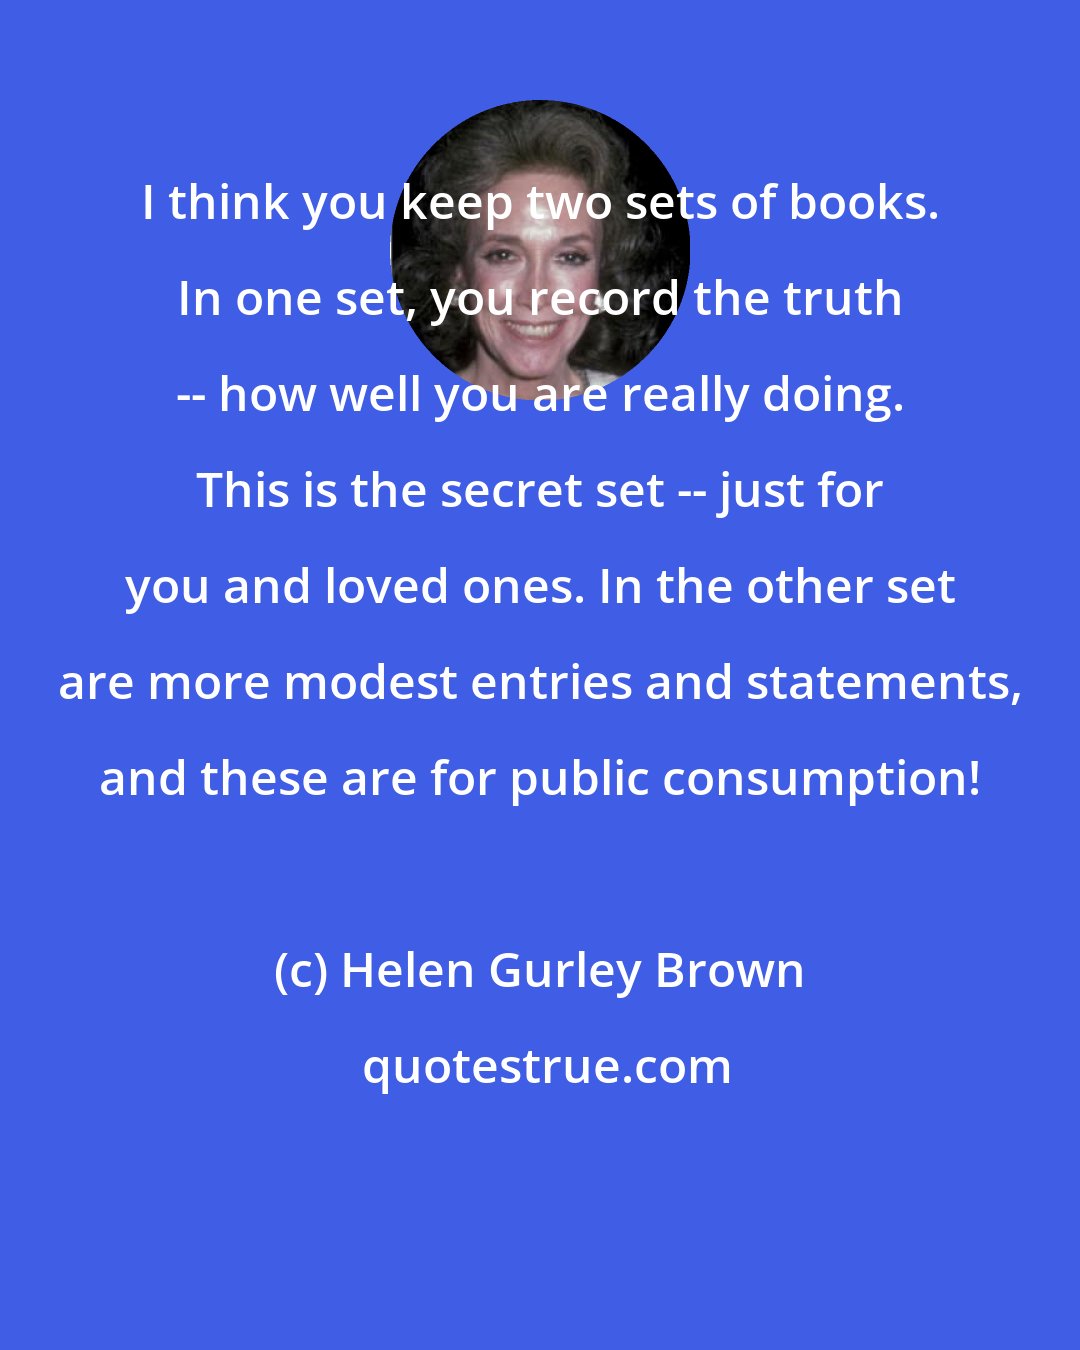 Helen Gurley Brown: I think you keep two sets of books. In one set, you record the truth -- how well you are really doing. This is the secret set -- just for you and loved ones. In the other set are more modest entries and statements, and these are for public consumption!